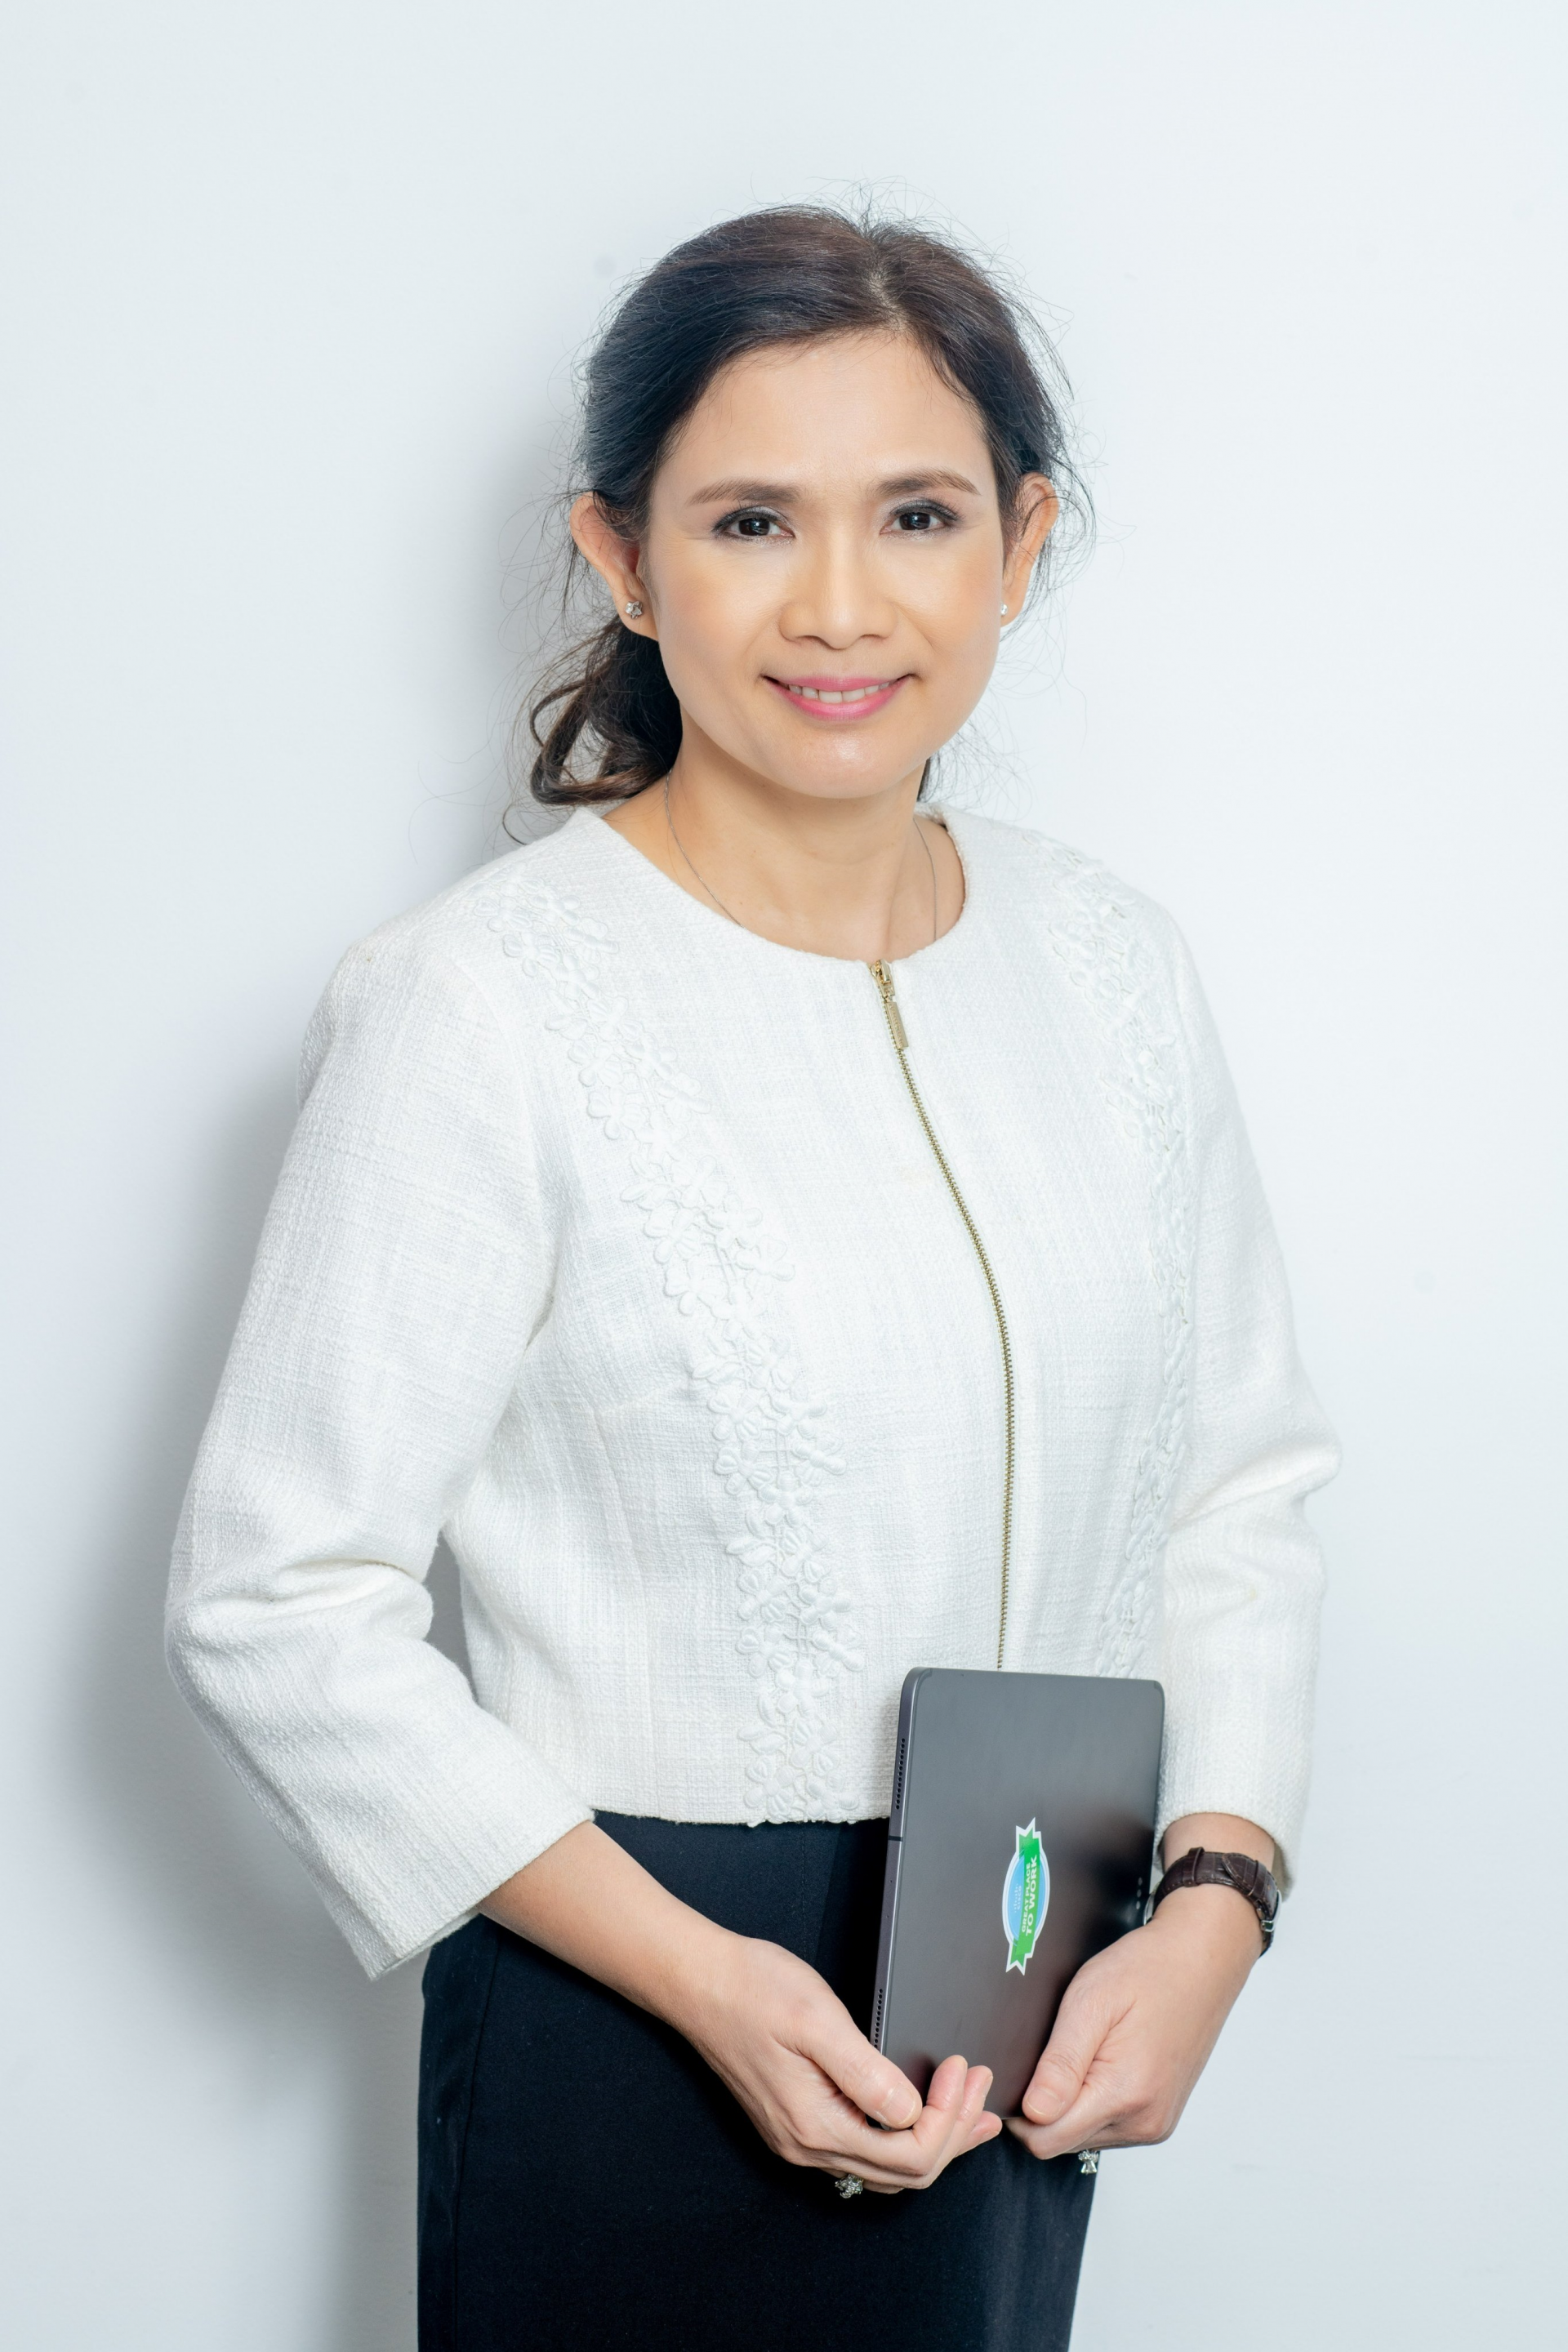 Cisco Vietnam's CEO shares her journey in the rapidly changing business world